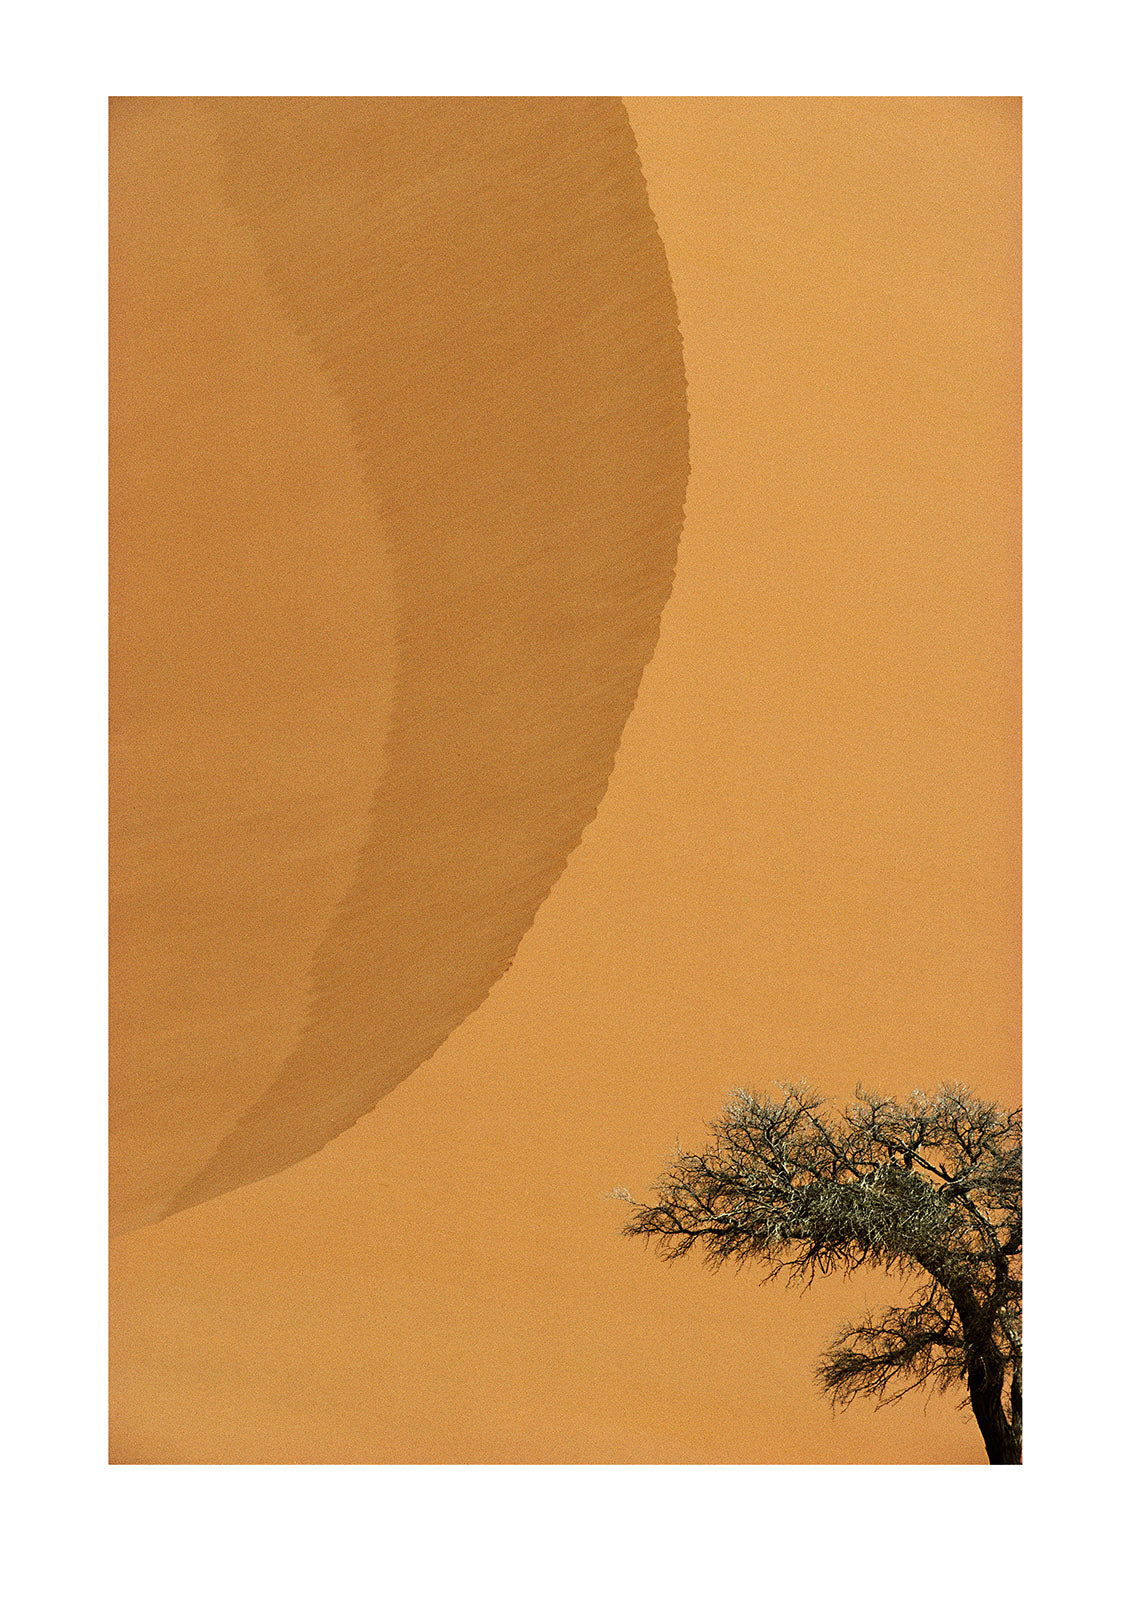 An acacia tree dwarfed by the scorching wall of a 300 meter-high sand dune. Sossussvlei Dunes, Great Southern Dune Field, Namibia.